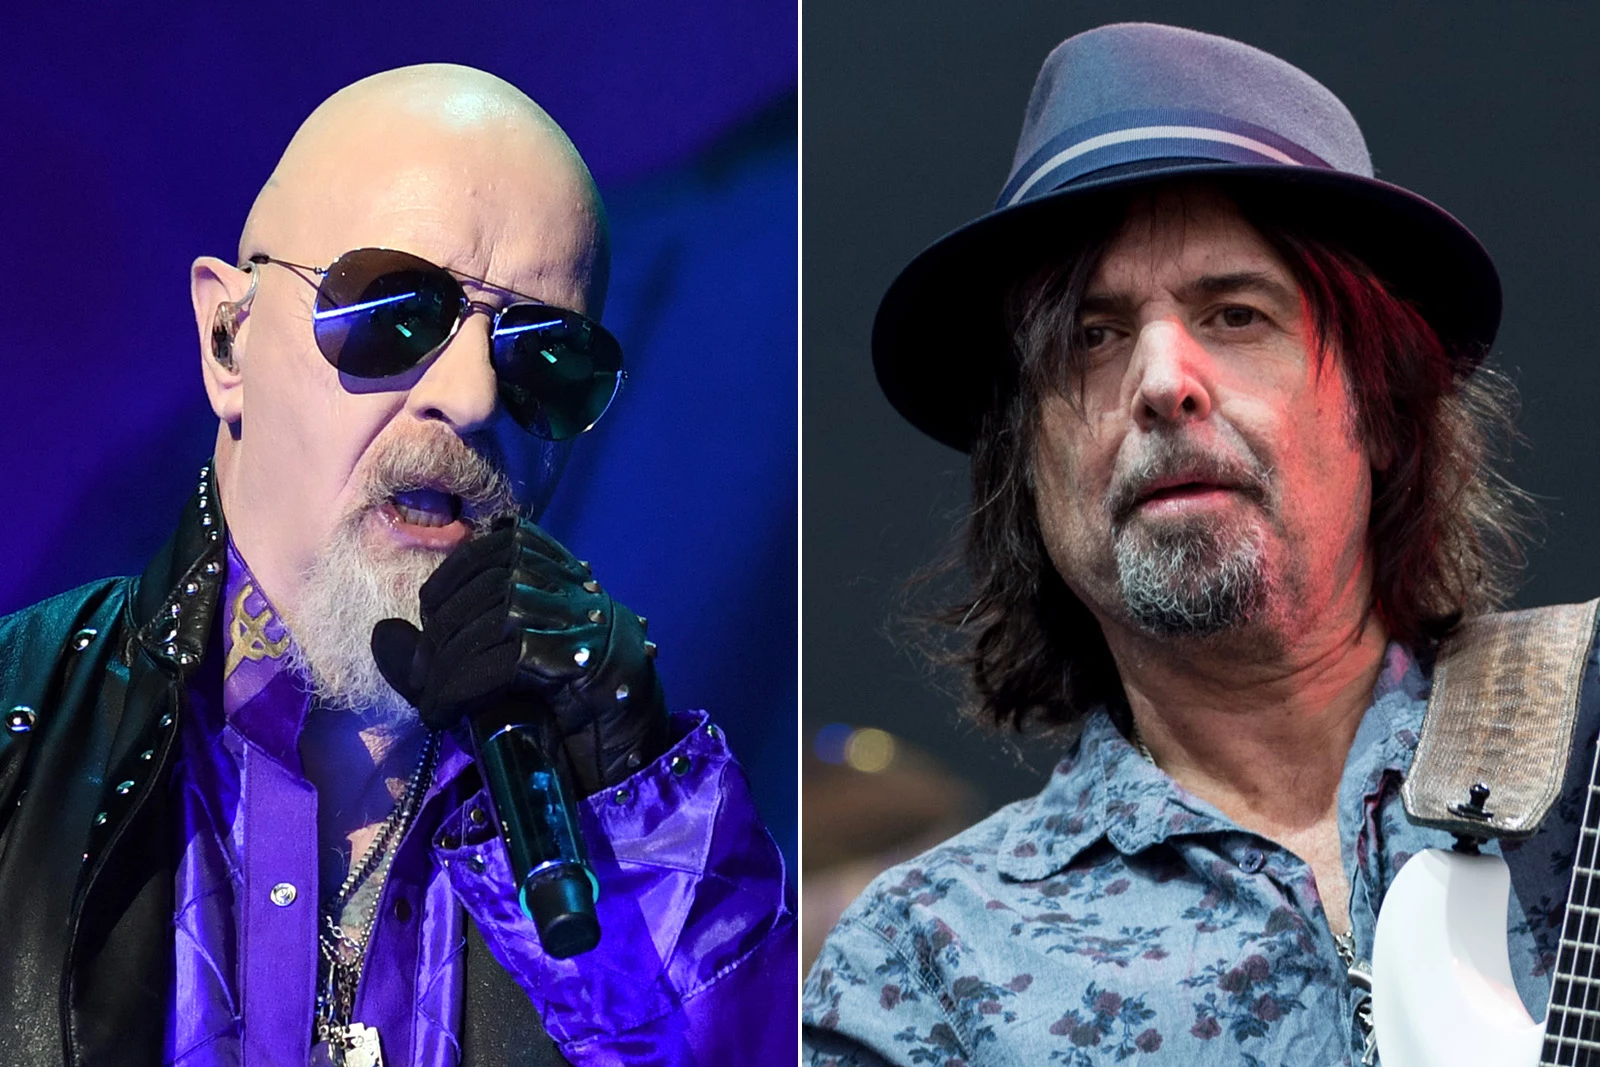 Listen to Rob Halford Guest on Phil Campbell Single Straight photo photo pic